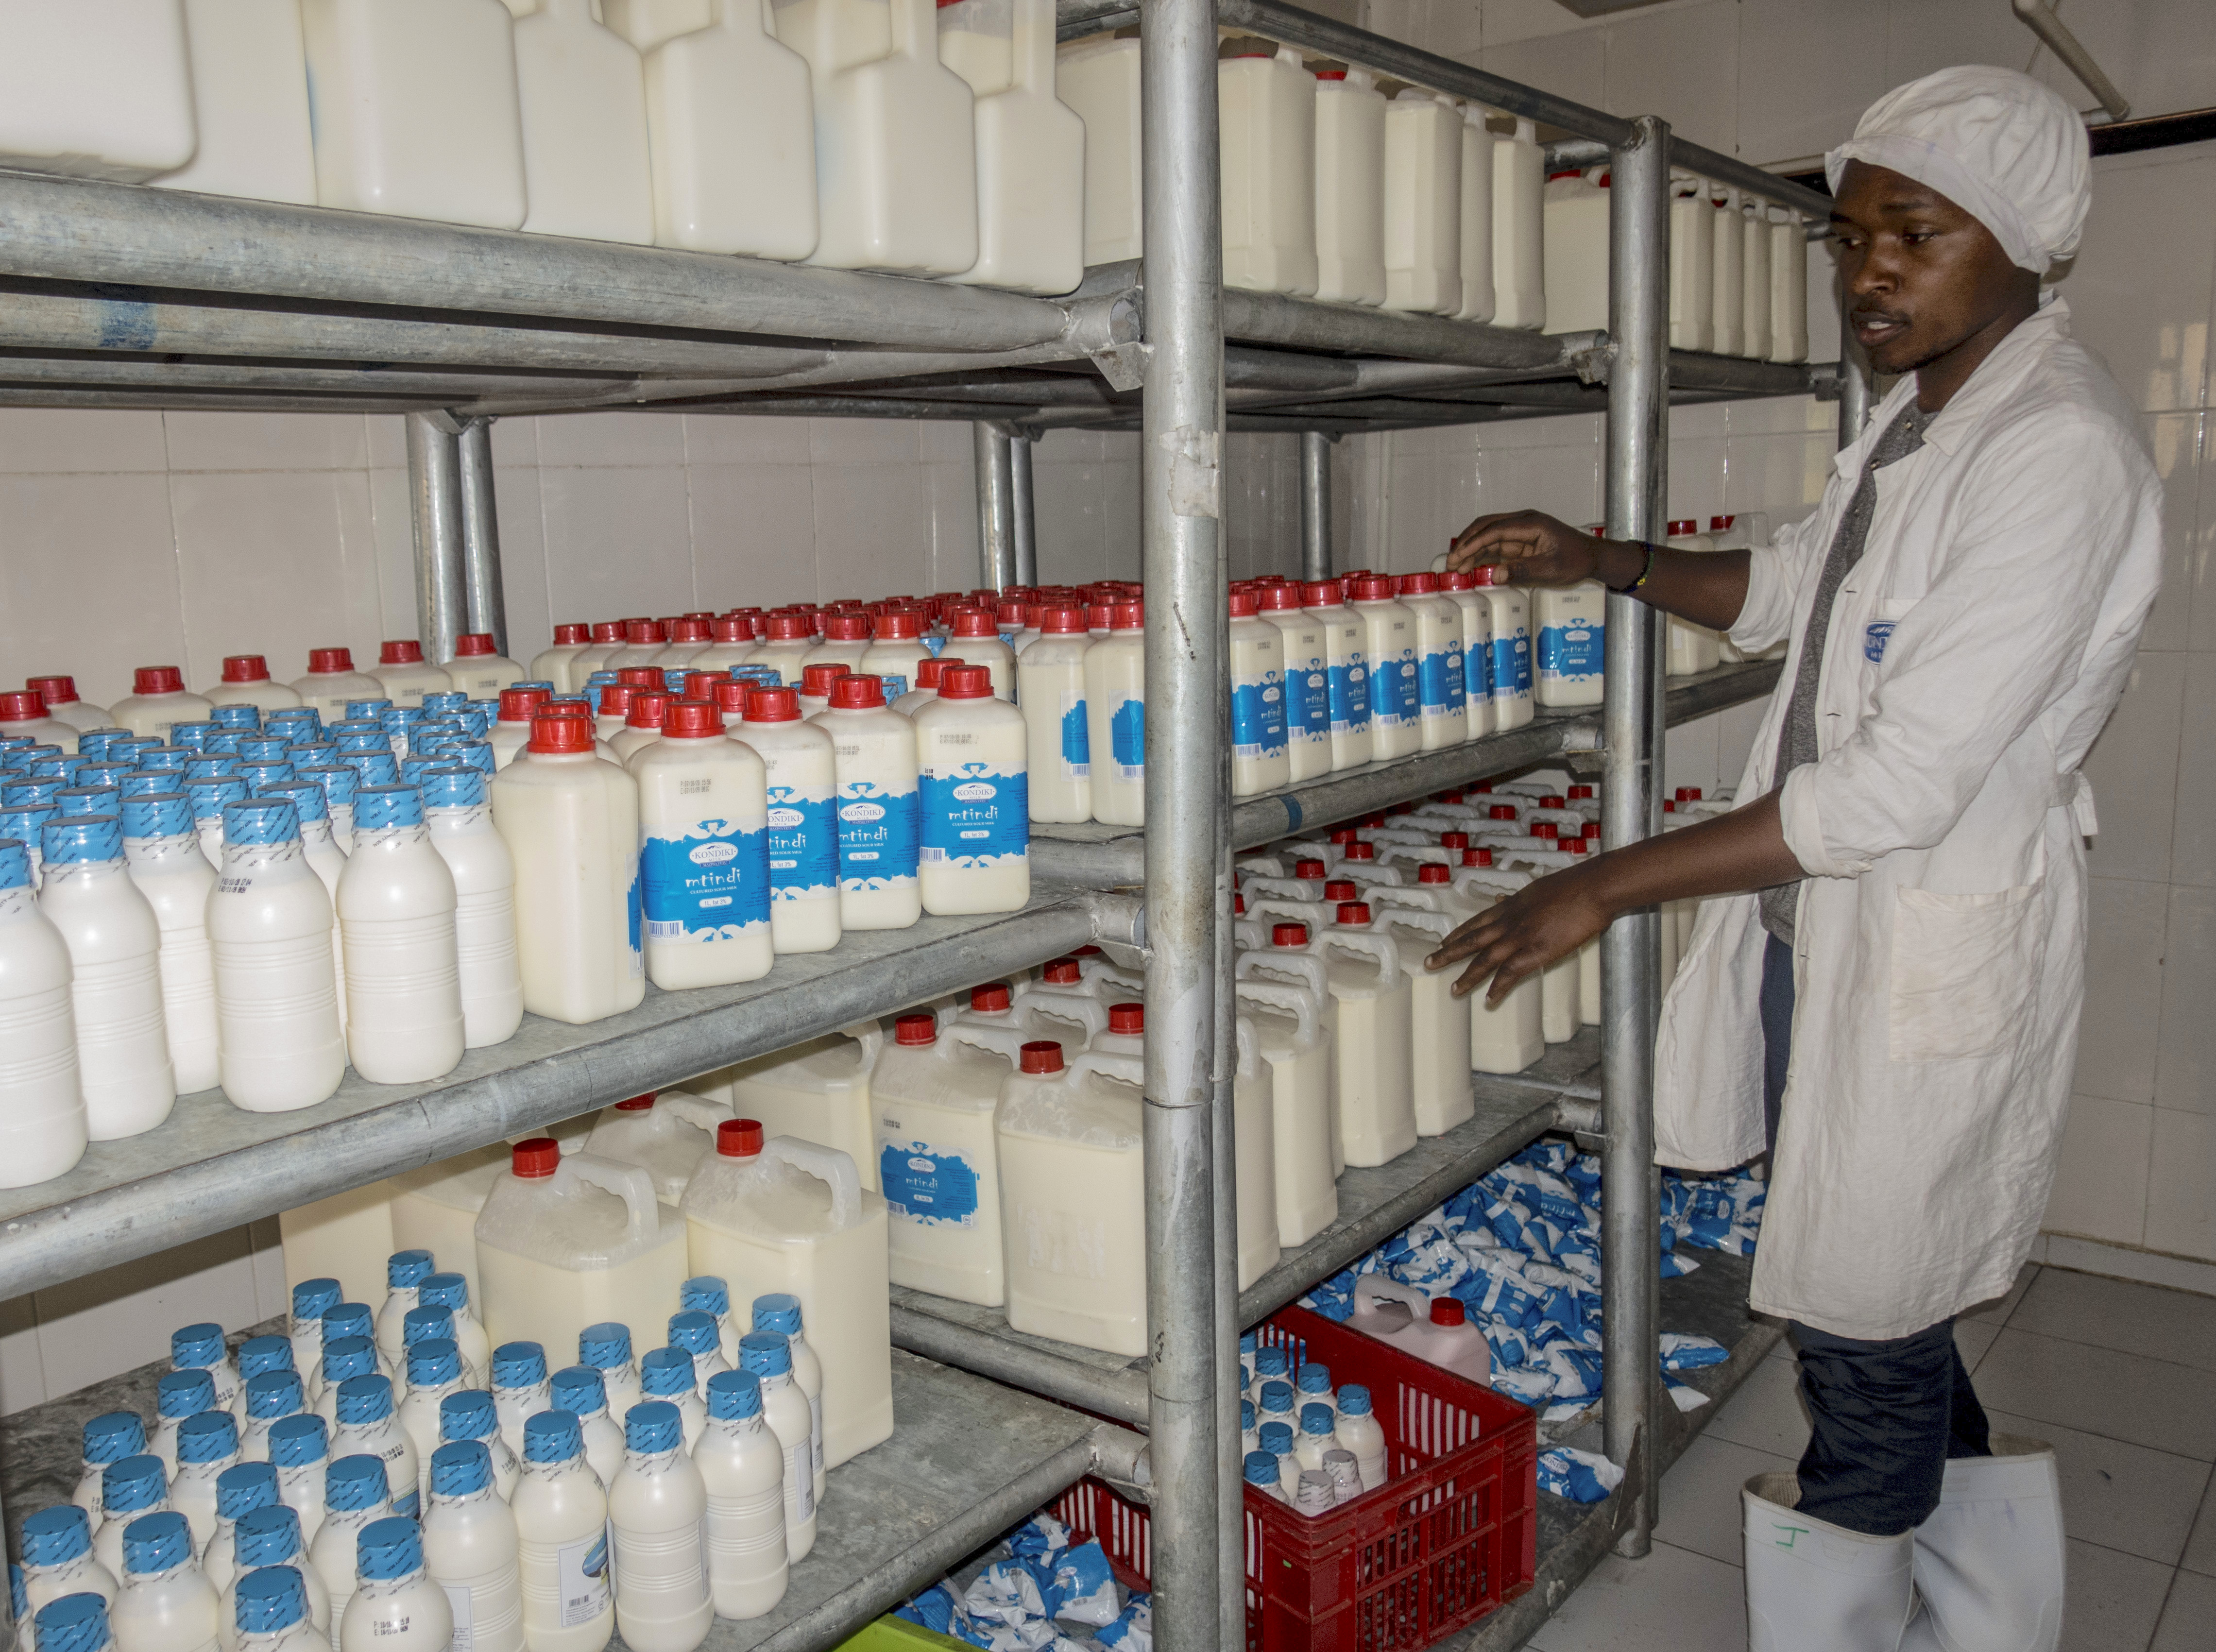 activity of a dairy cooperative on the eastern slopes of Kilimanjaro in Tanzania, photo: R.G.Zduńczyk / Poland-East Africa Economic Foundation